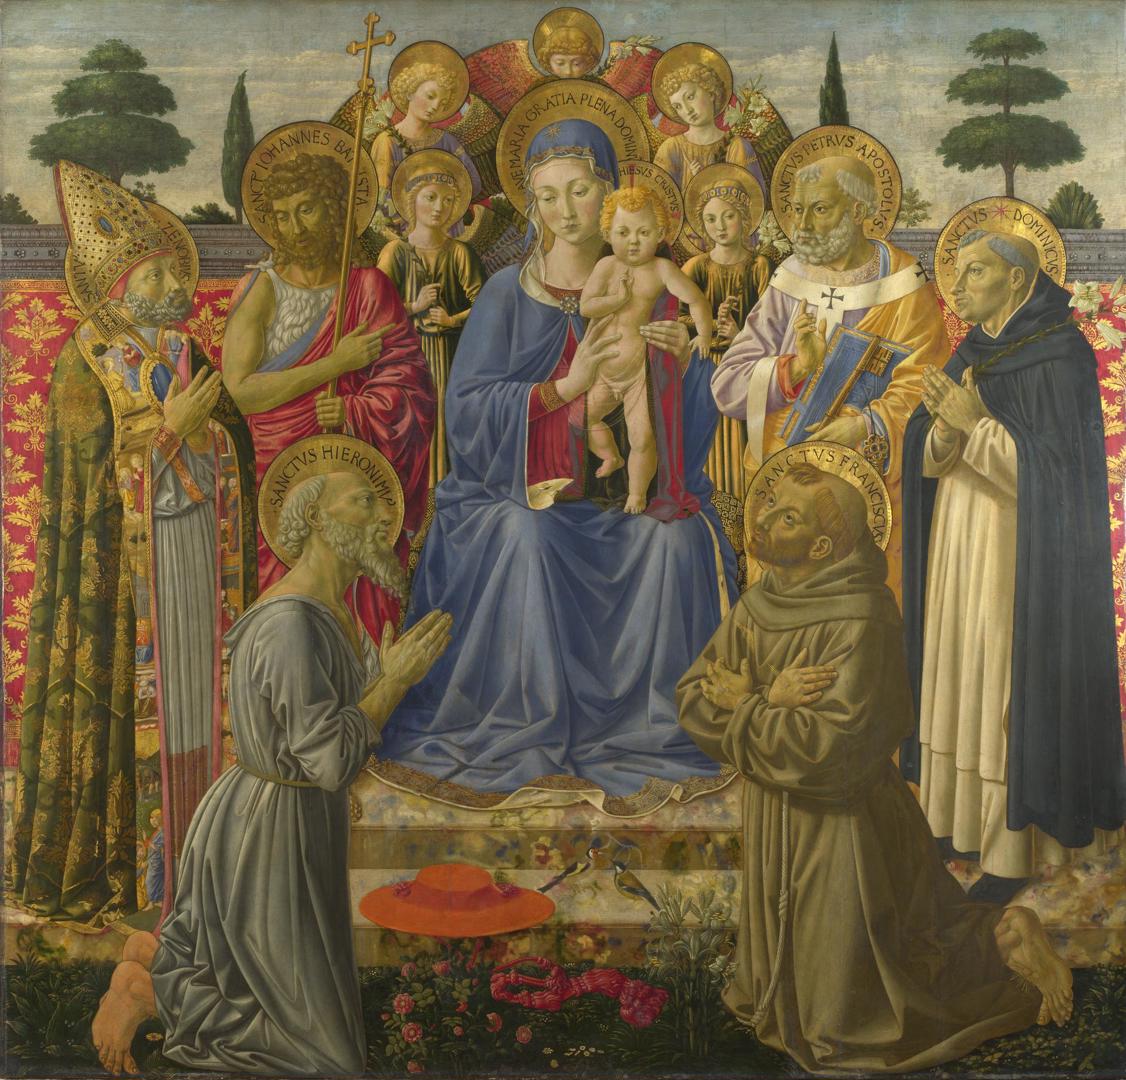 The Virgin and Child Enthroned among Angels and Saints by Benozzo Gozzoli